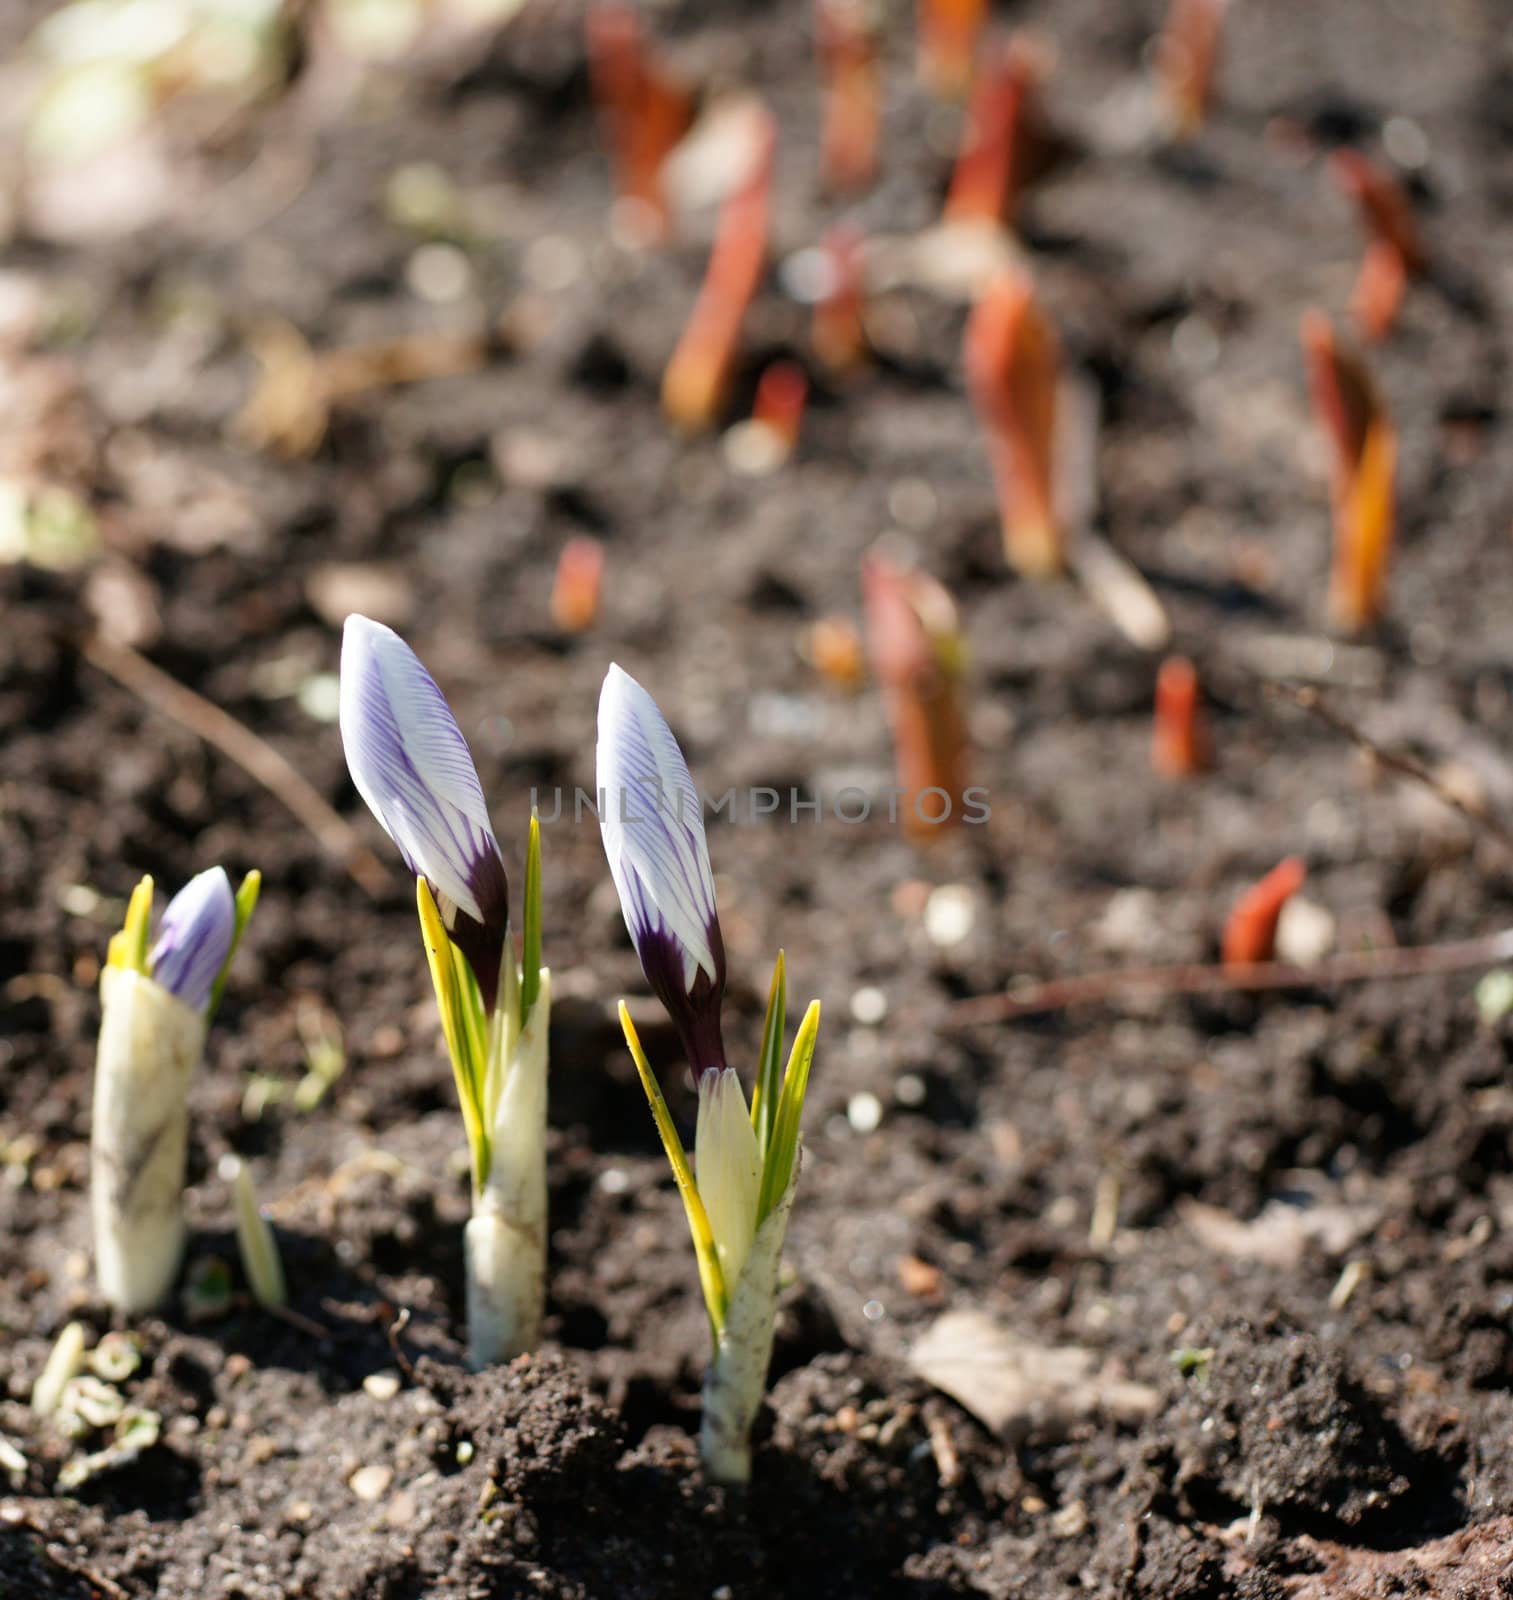 Early spring sprouts in the garden